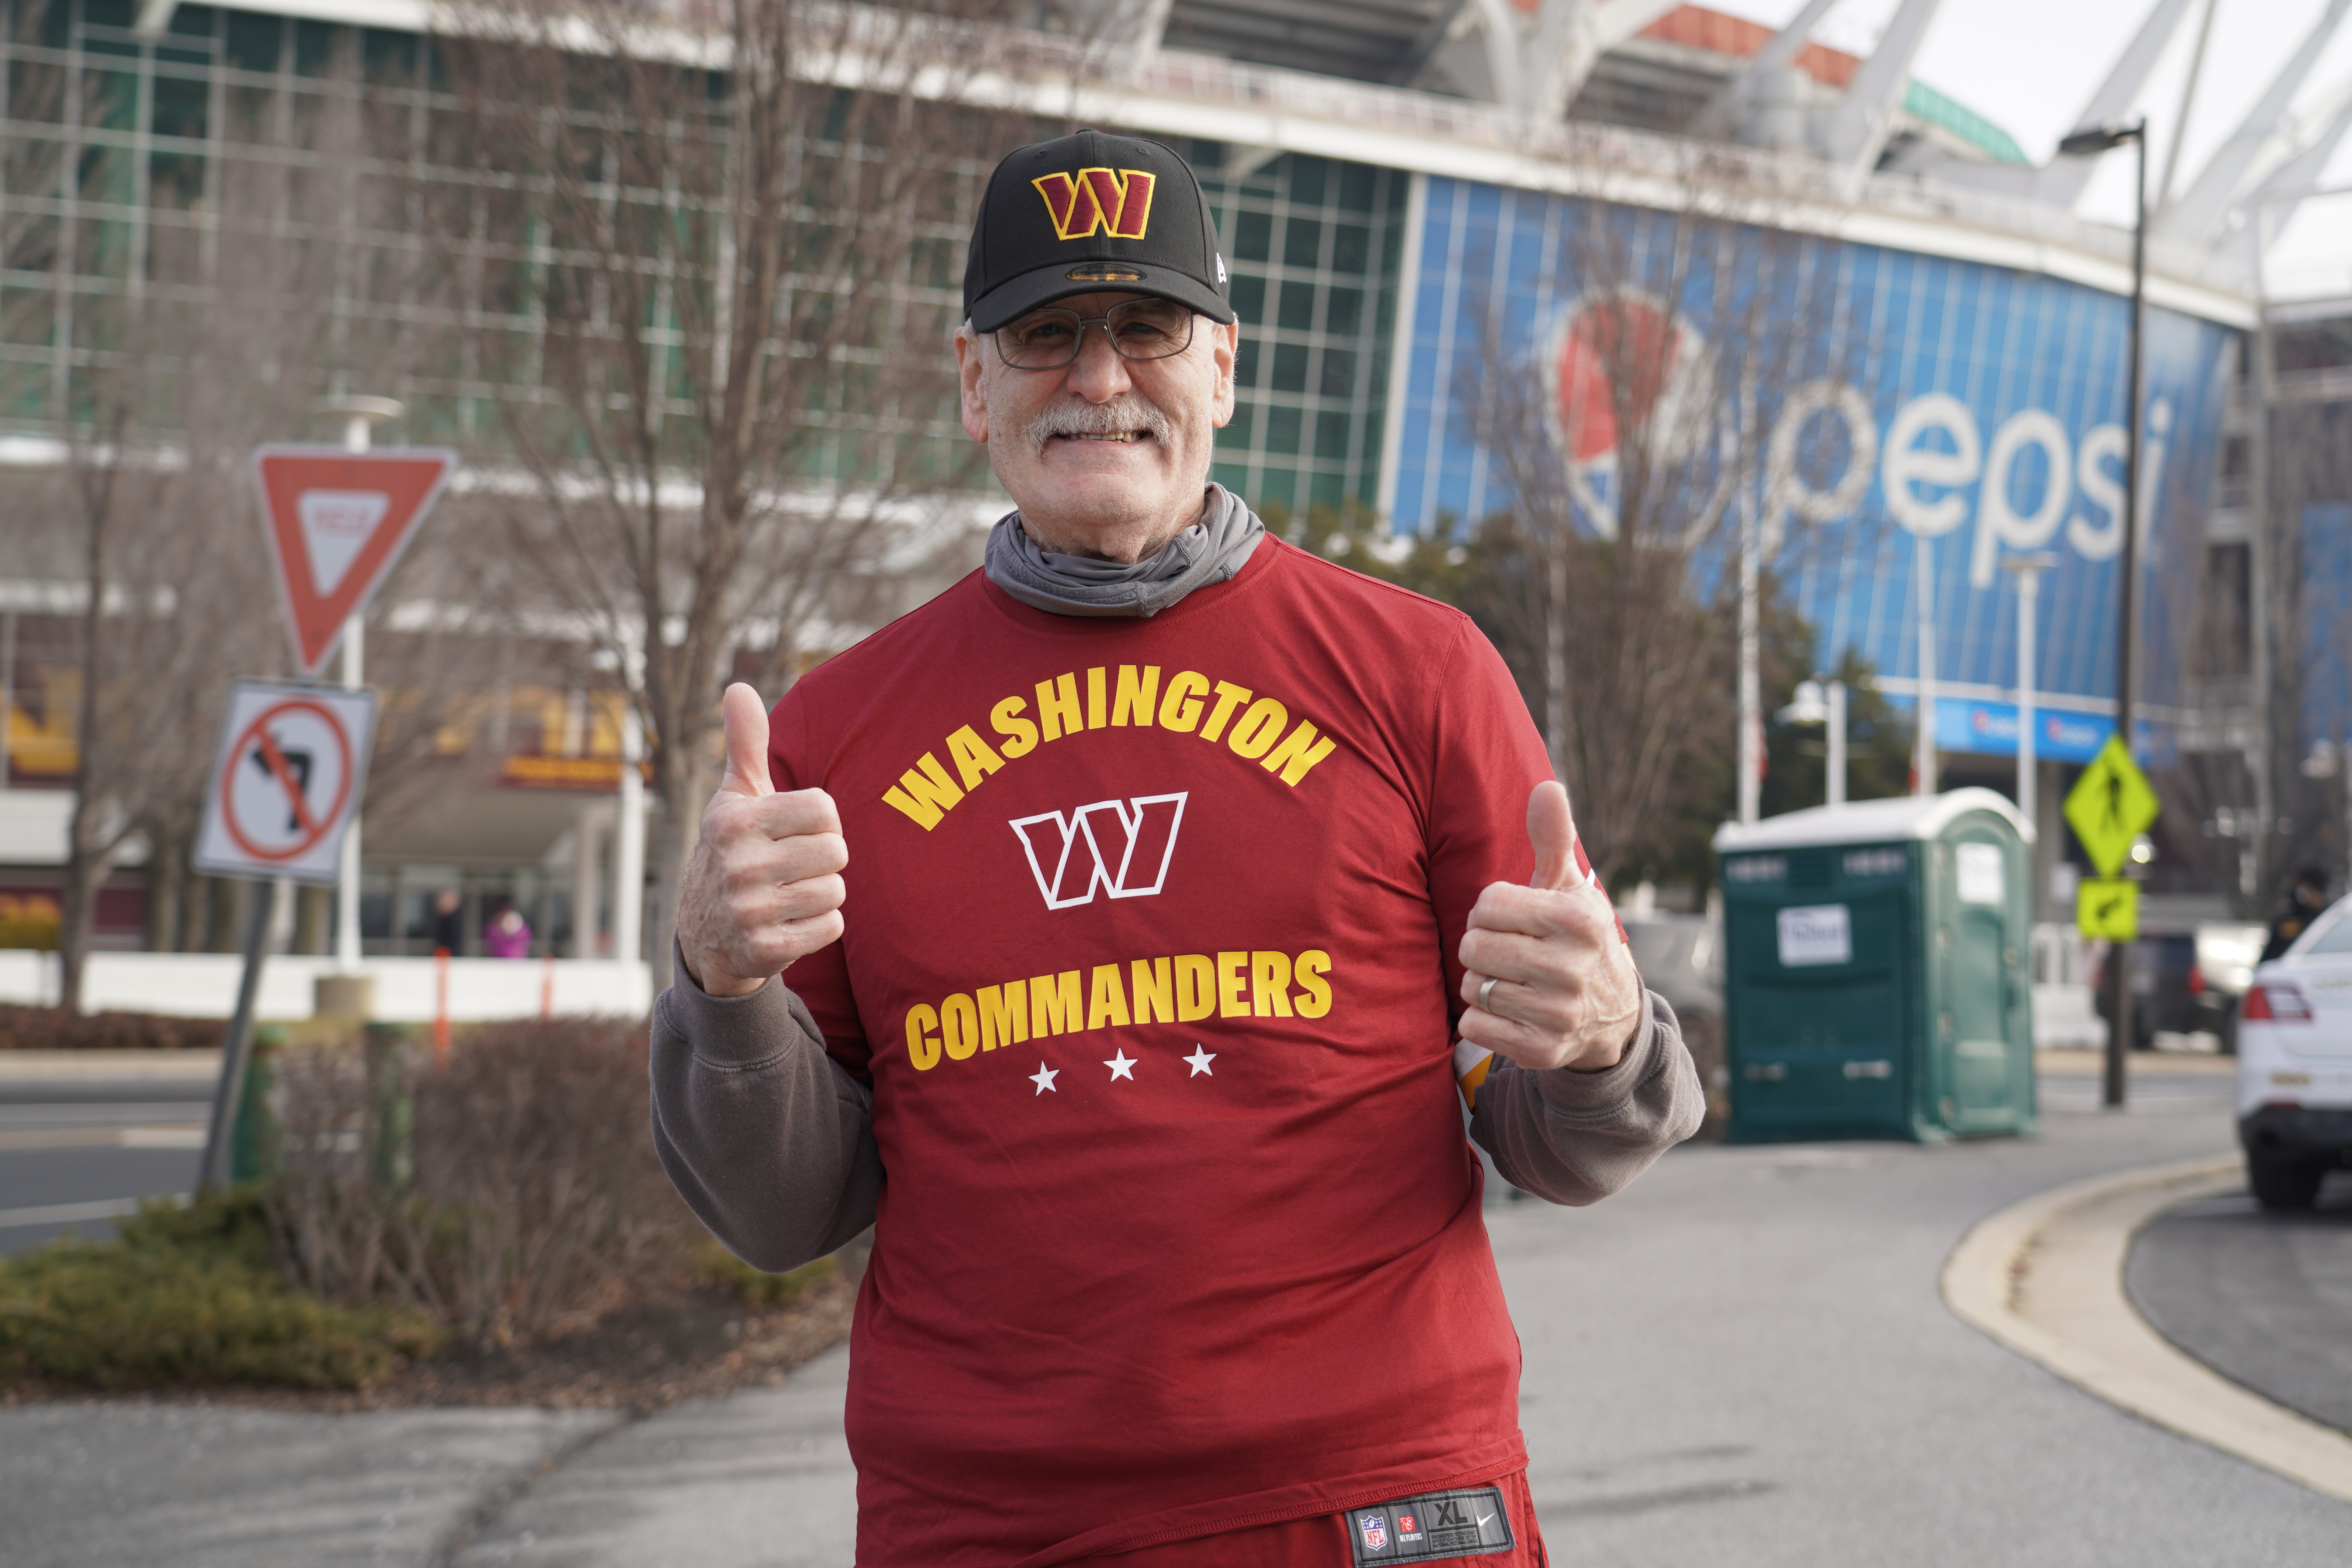 Washington Commanders is the new name for former Redskins NFL team